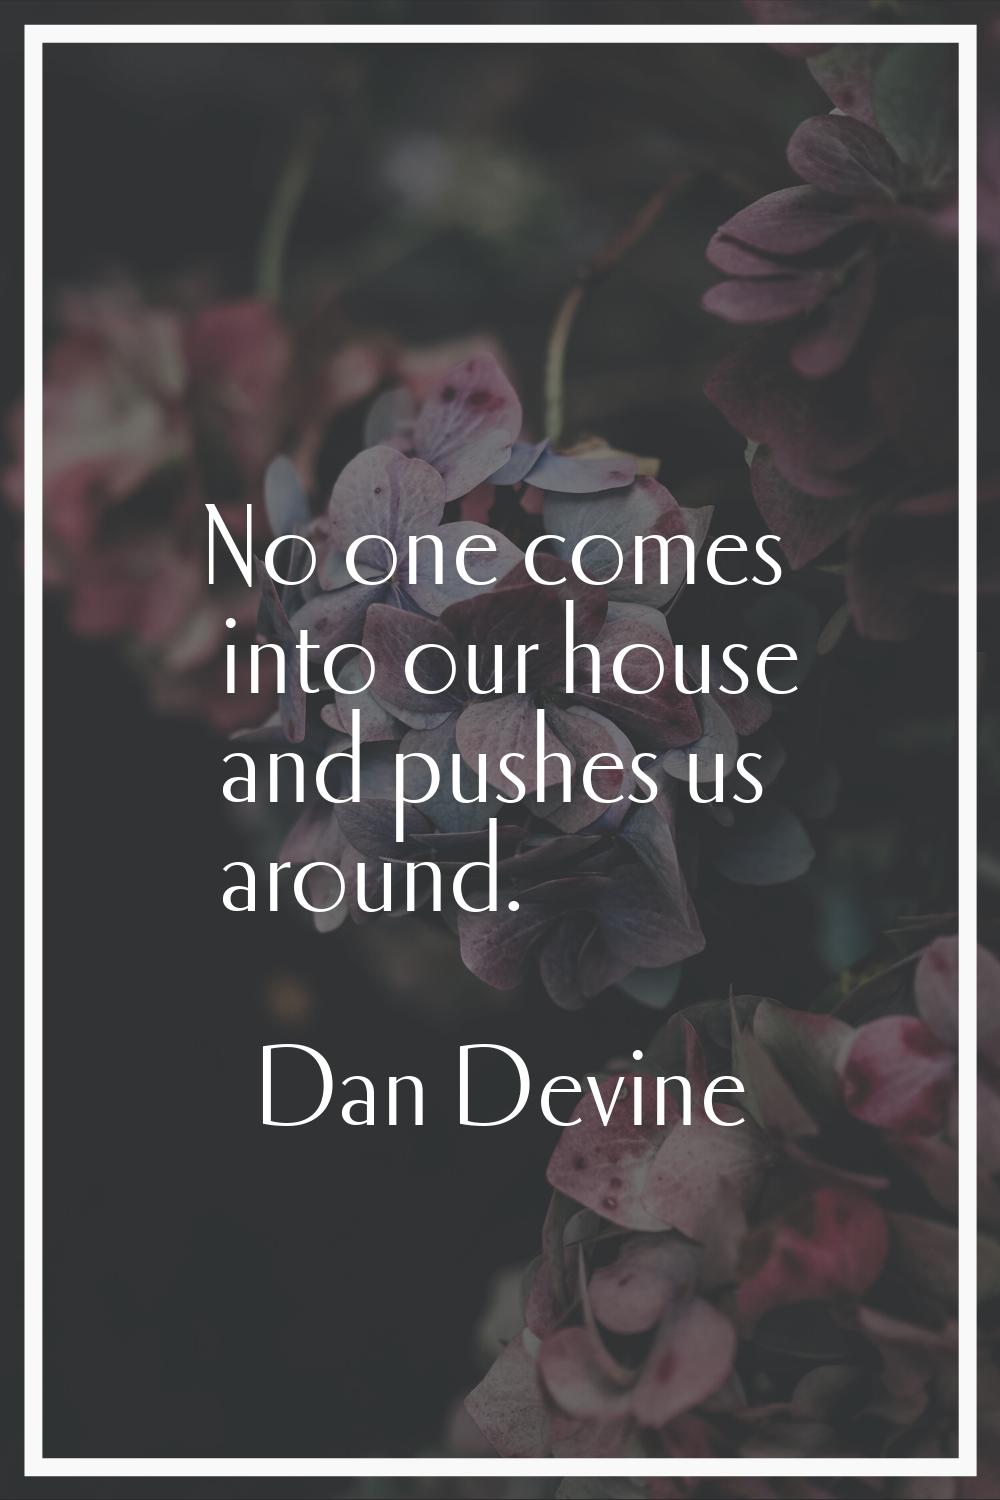 No one comes into our house and pushes us around.